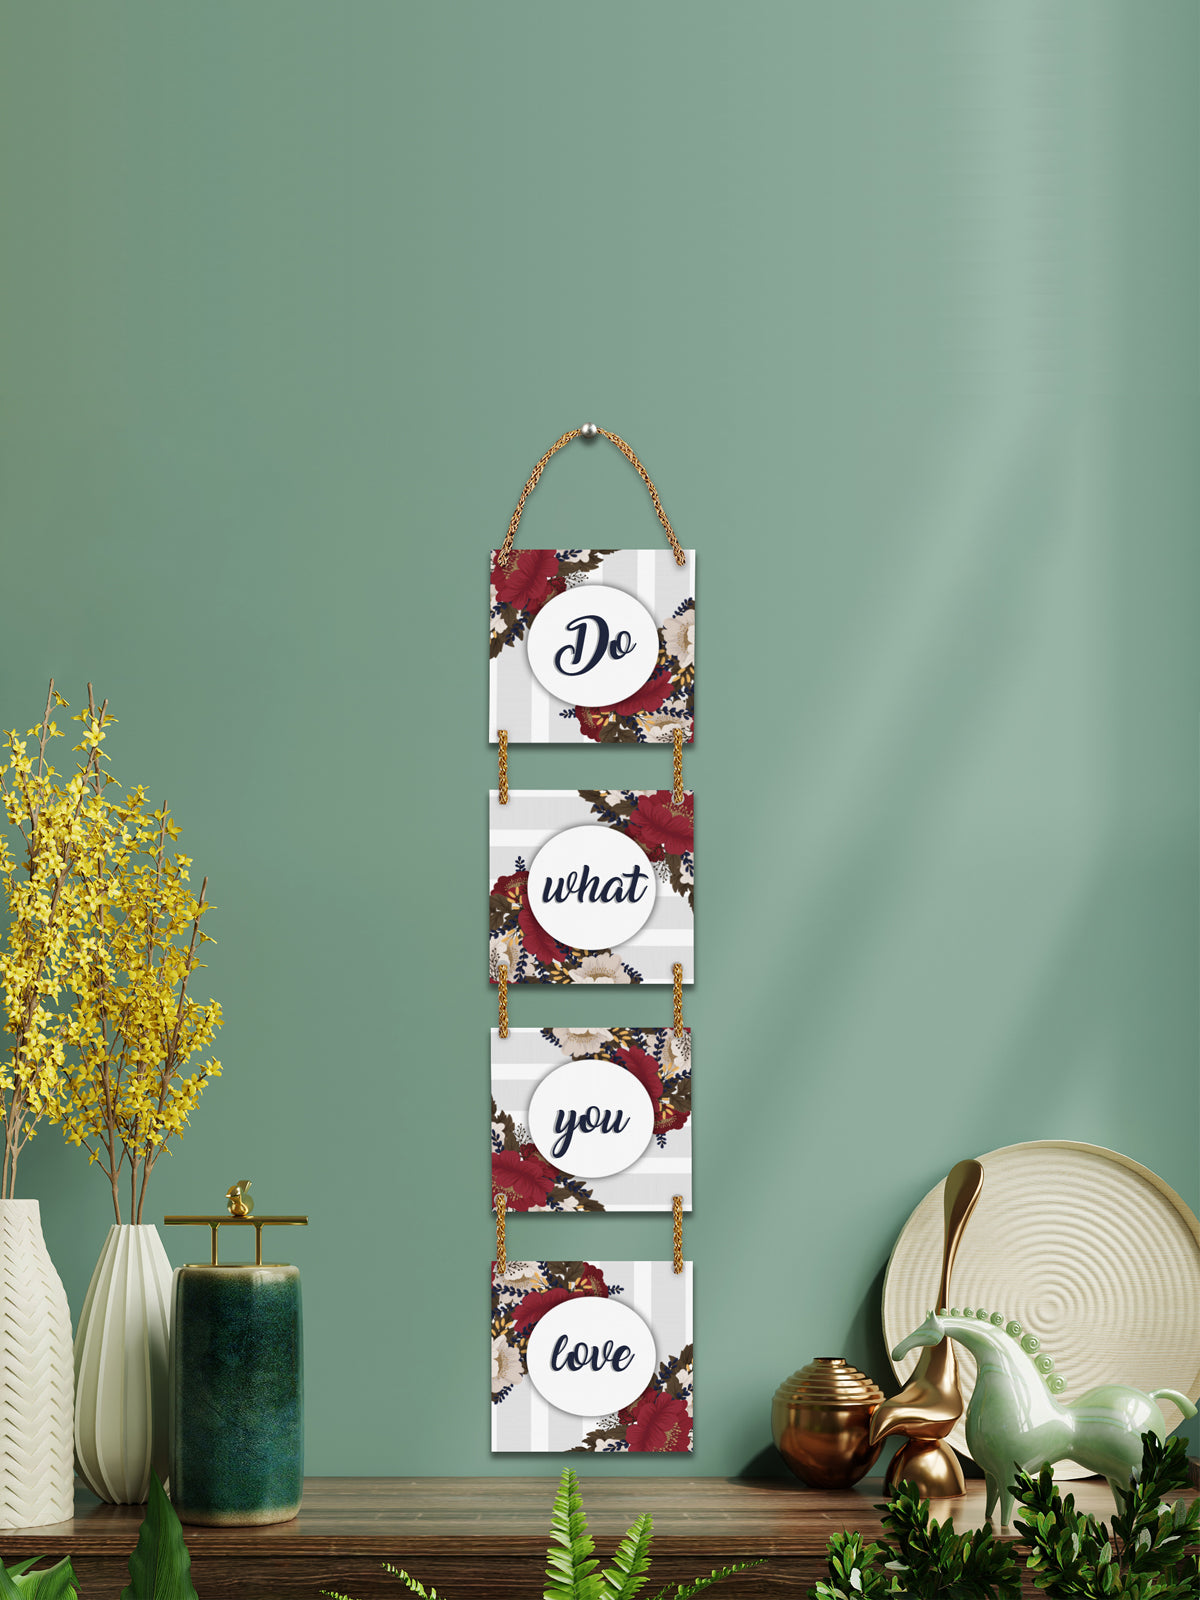 Do What You Love 4 Blocks Wooden Wall Hanging